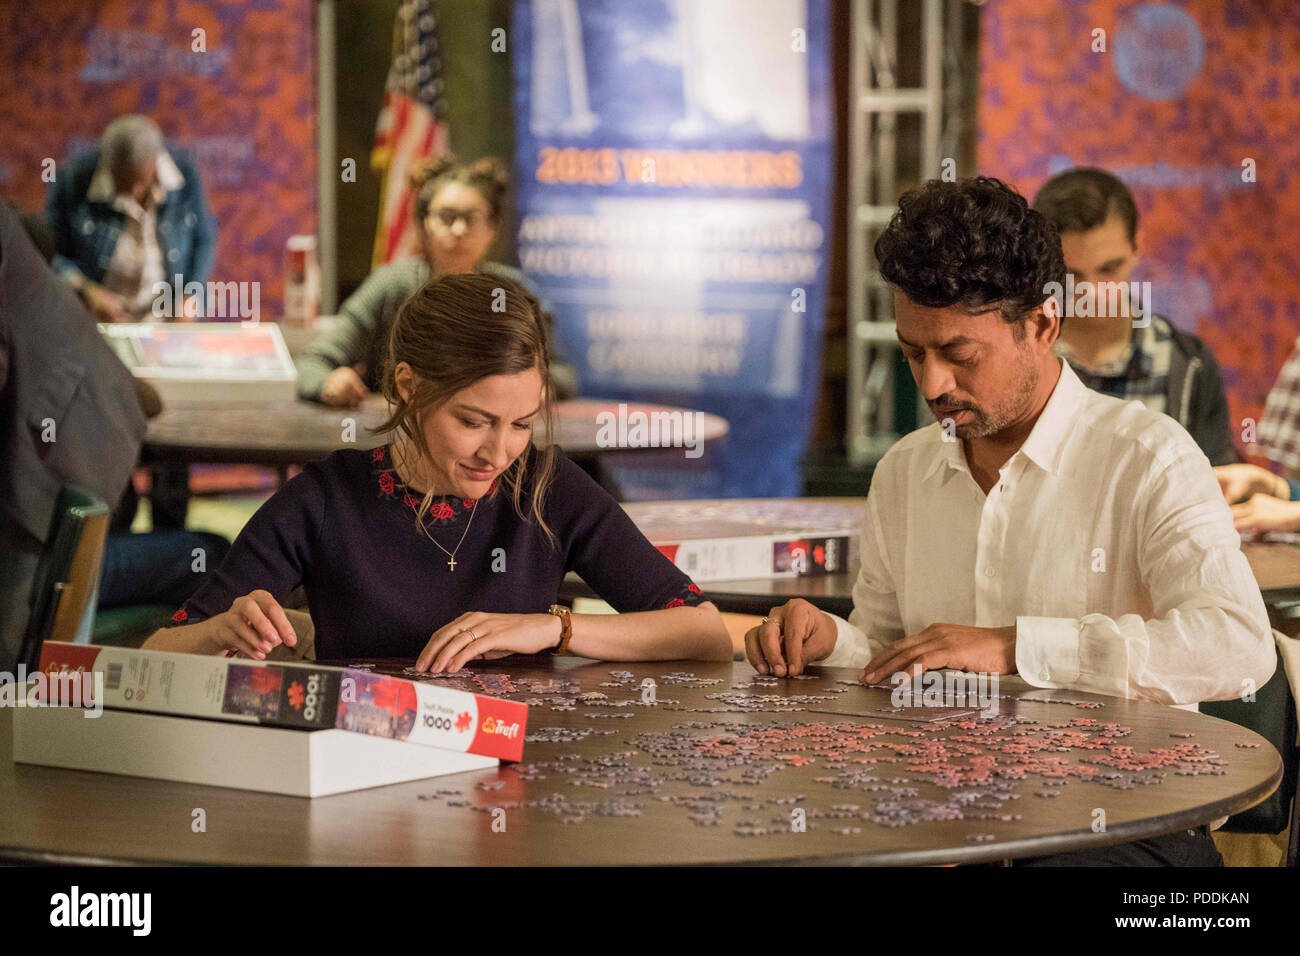 RELEASE DATE: July 27, 2018 TITLE: Puzzle STUDIO: Sony Pictures Classics DIRECTOR: Marc Turtletaub PLOT: Agnes, taken for granted as a suburban mother, discovers a passion for solving jigsaw puzzles which unexpectedly draws her into a new world - where her life unfolds in ways she could never have imagined. STARRING: KELLY MACDONALD as Agnes, IRRFAN KHAN as Robert. (Credit Image: © Sony Pictures Classics/Entertainment Pictures) Stock Photo